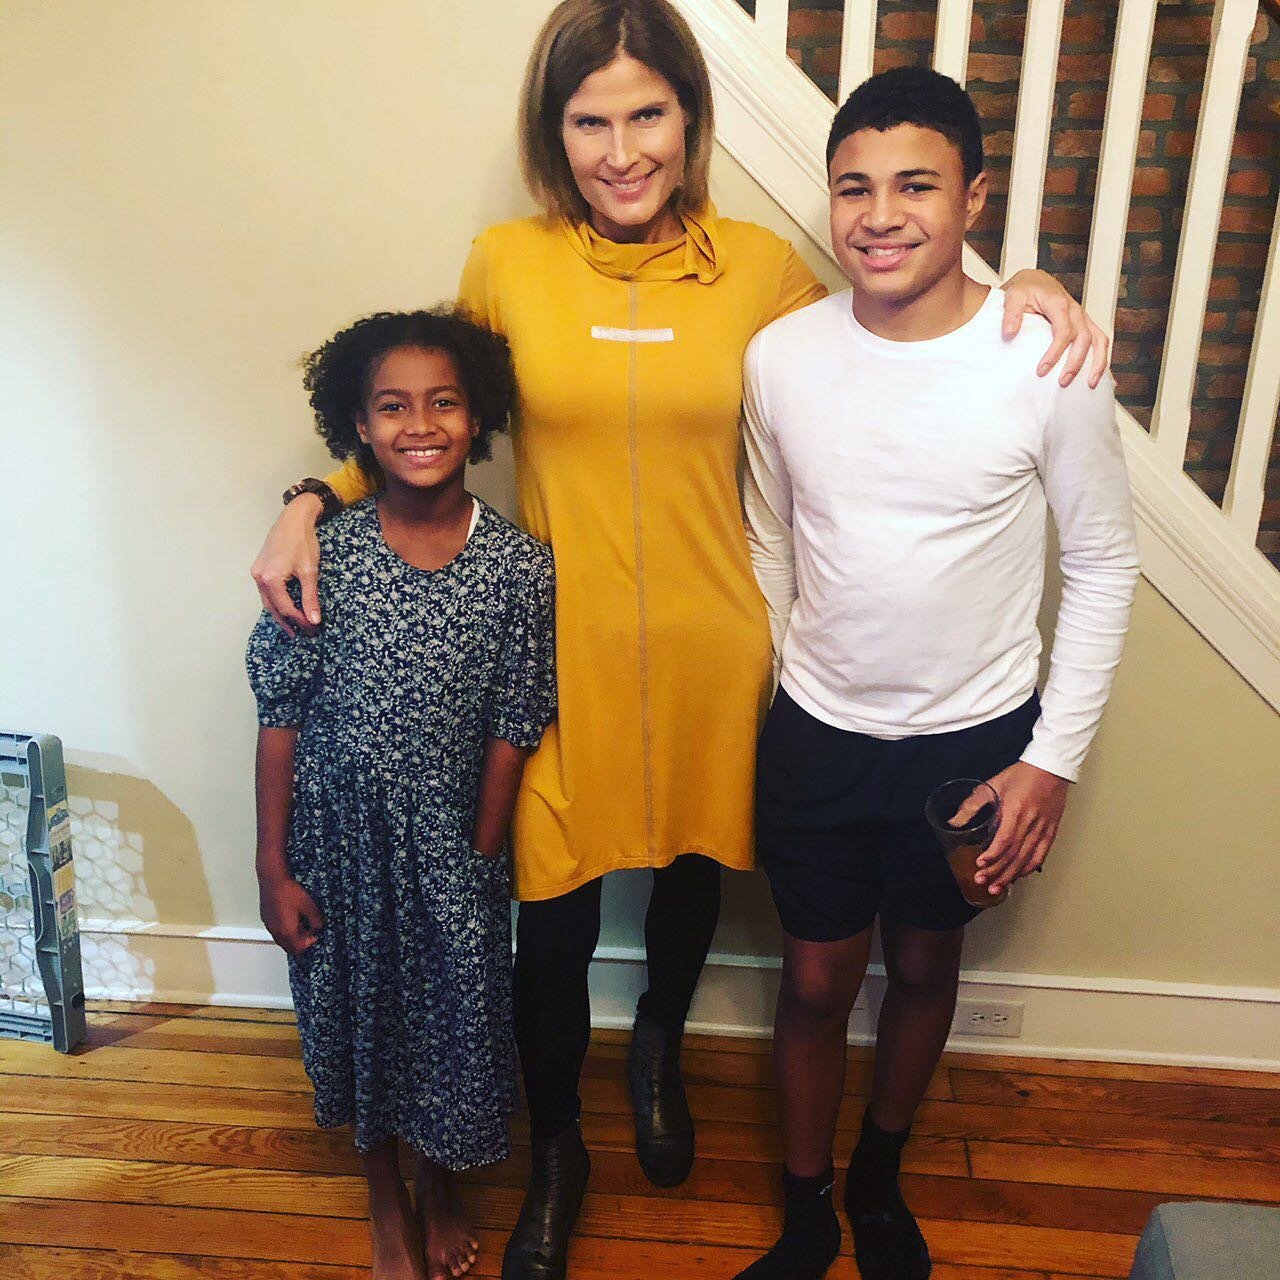 Sarah celebrated Thanksgiving with her beautiful family in her  s t i n  a  s a y r e  hooded dress. You can have one too.  Click on our website button on our profile page.  www.stinasayre.com